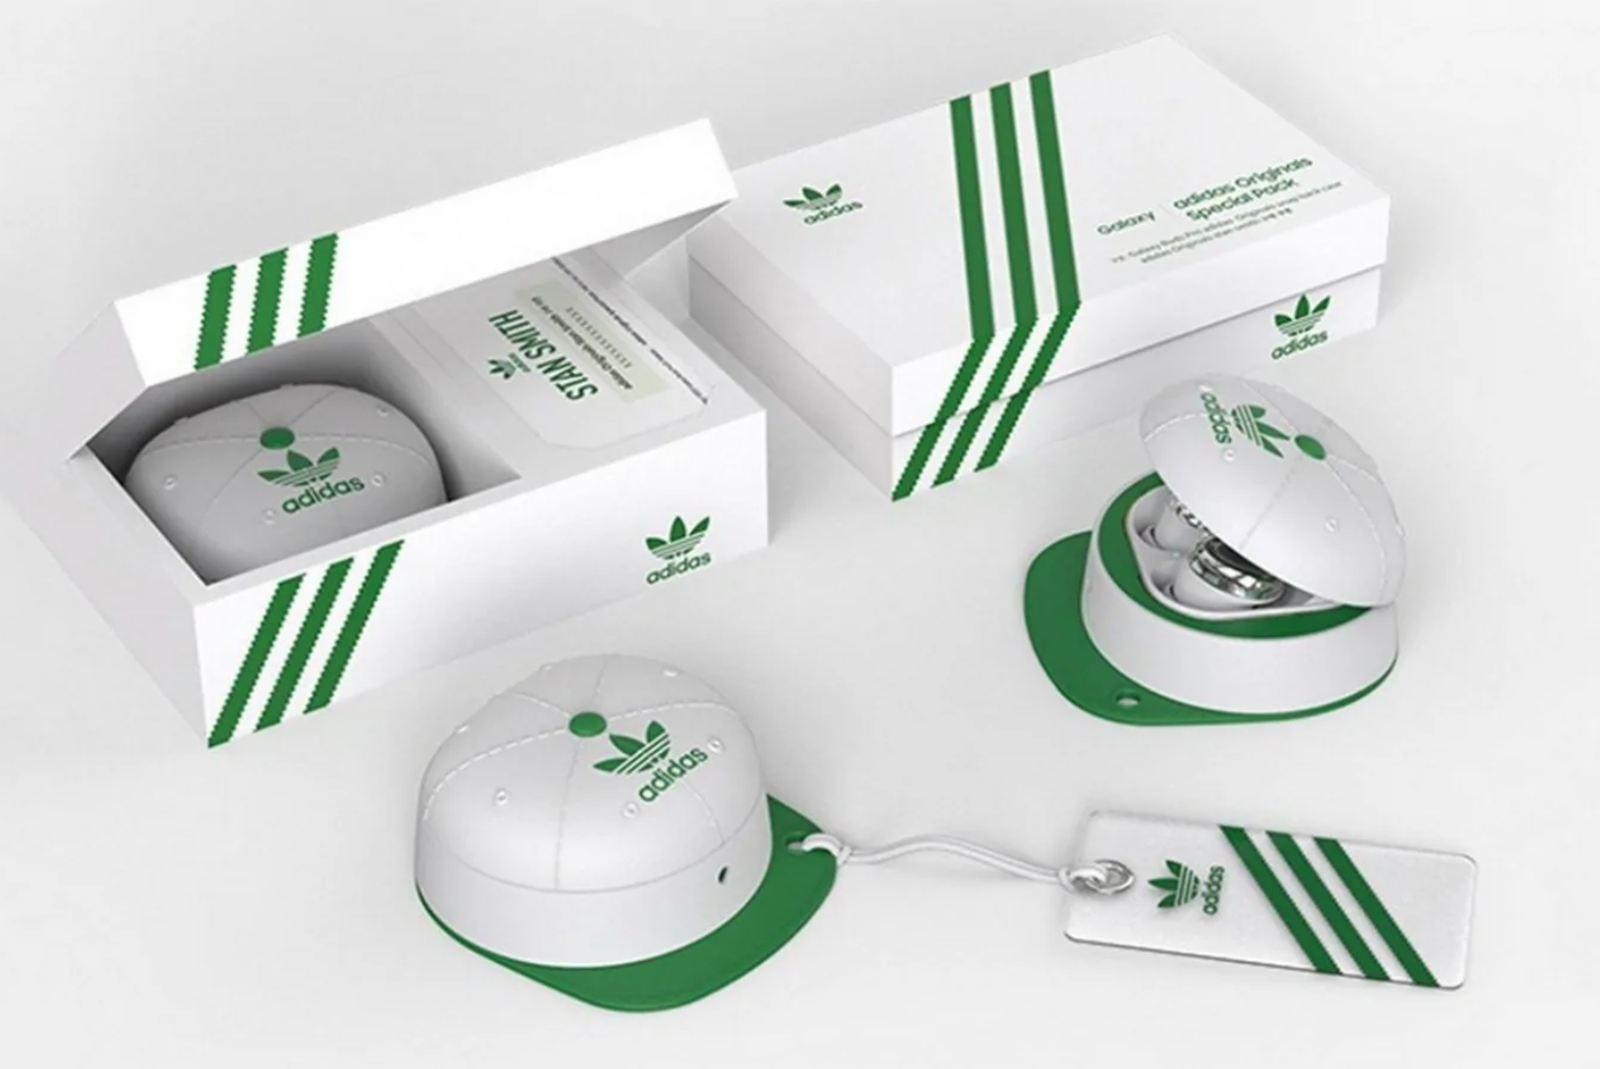 Samsung teamed up with Adidas to make Stan Smith Galaxy Buds Pro photo 1